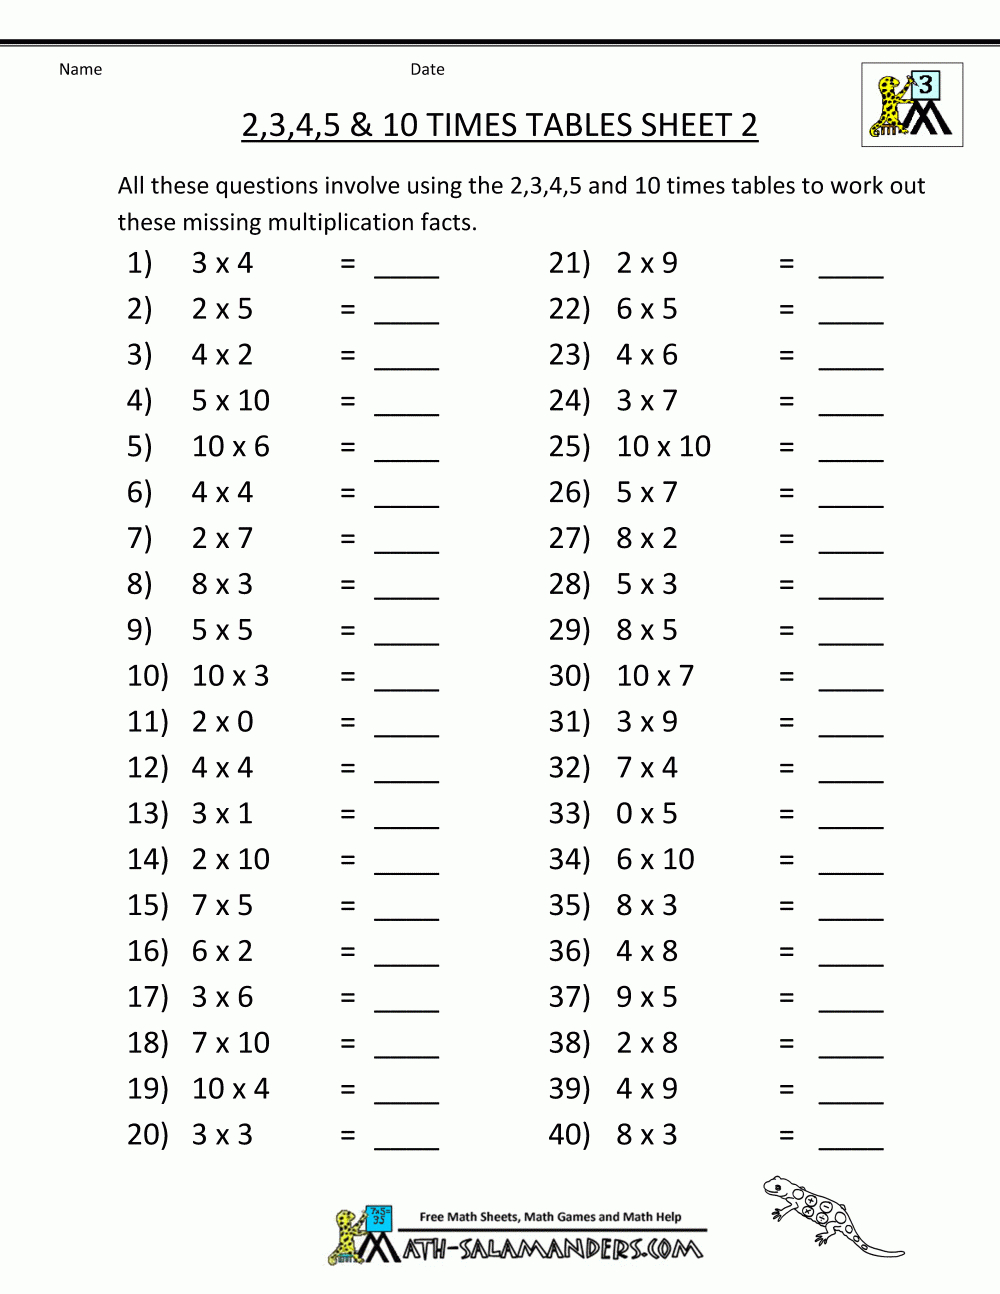 5 Maths For 10 Year Olds worksheets Printable multiplication multiplication worksheets Grade 5 